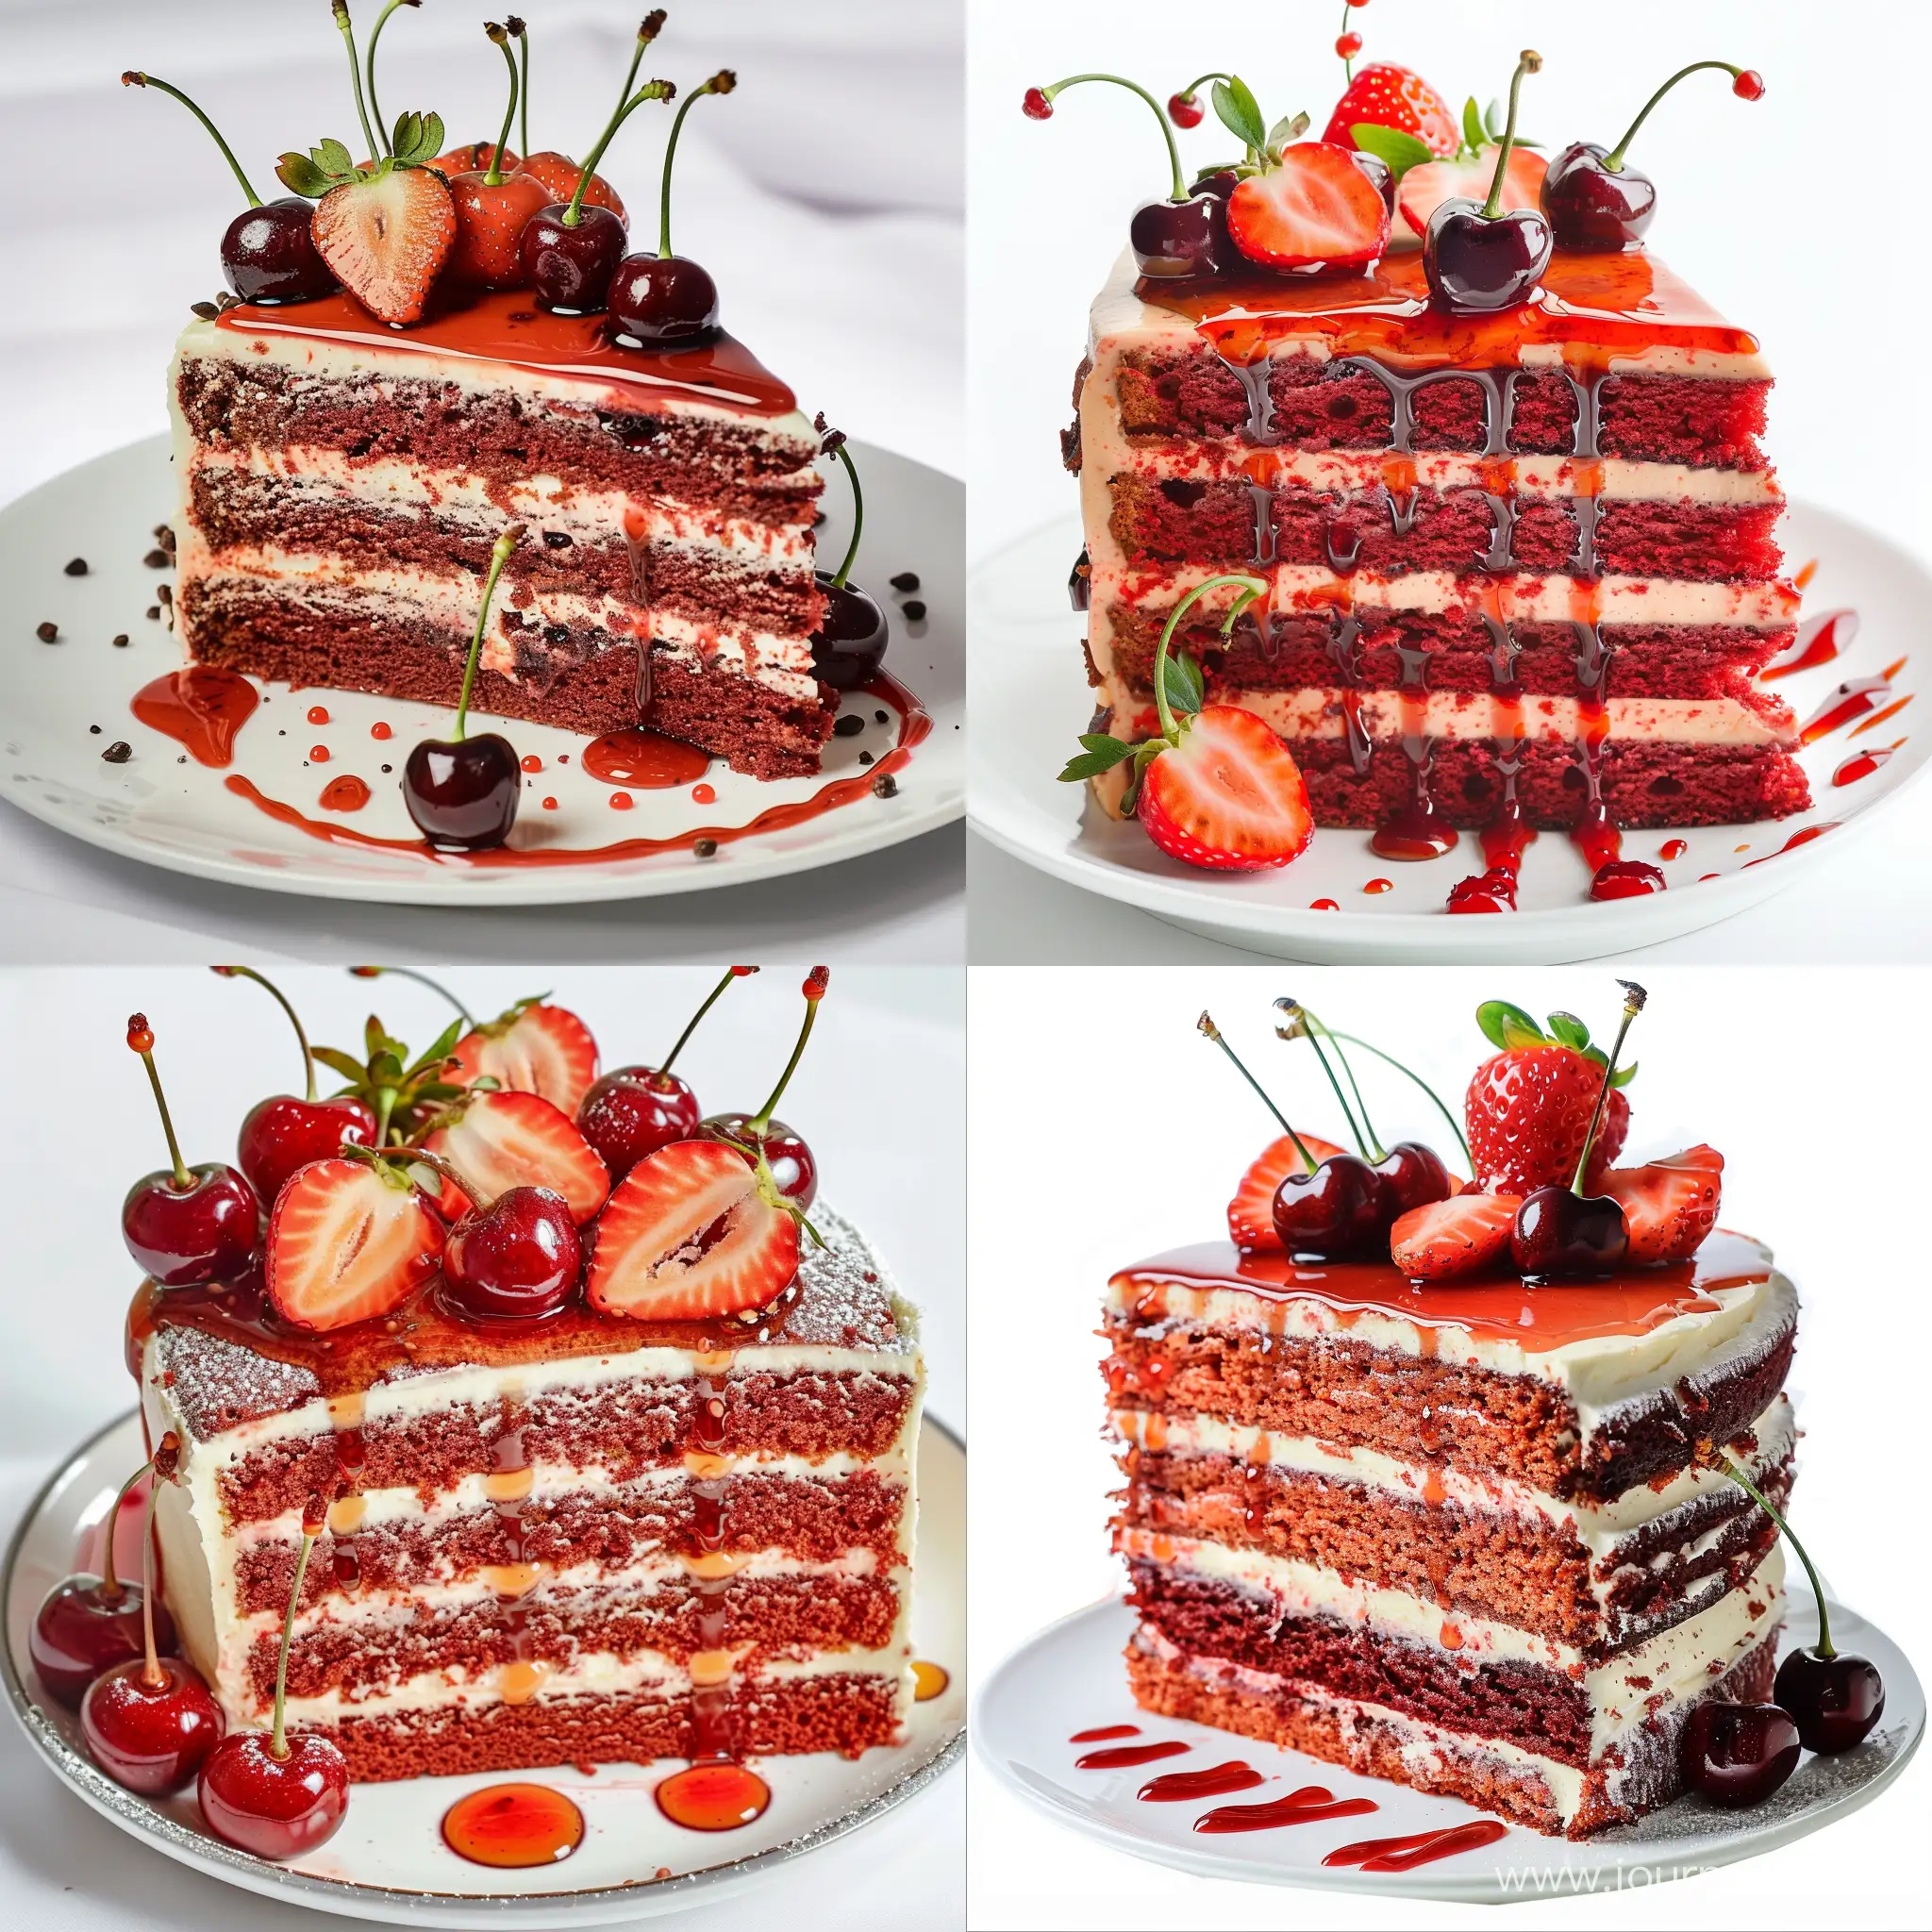 Decadent-Red-Velvet-Cake-with-Fresh-Strawberry-and-Cherry-Decorations-on-White-Plate